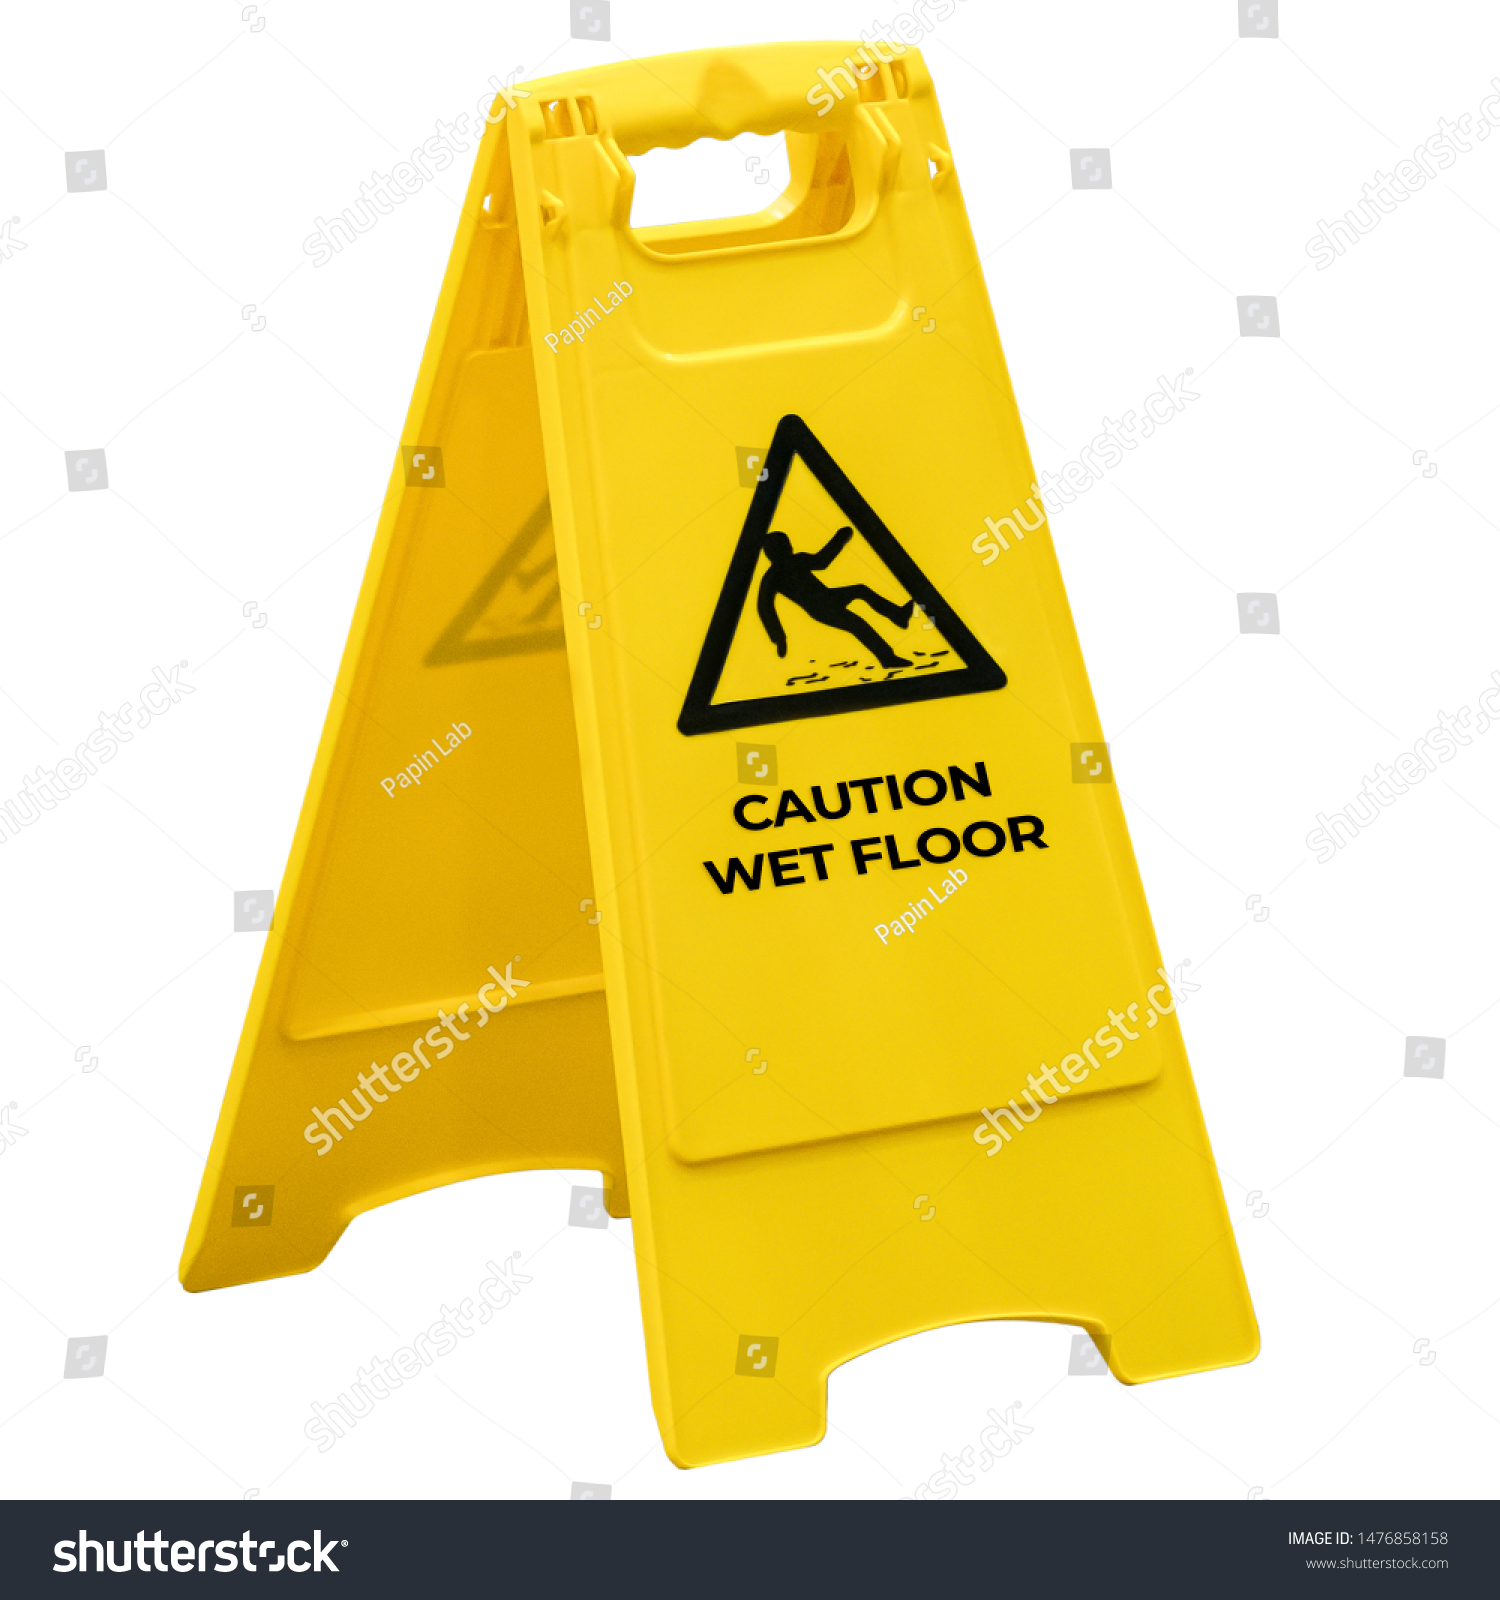 Bright Yellow Sign Icon Falling Man Stock Photo Edit Now 1476858158